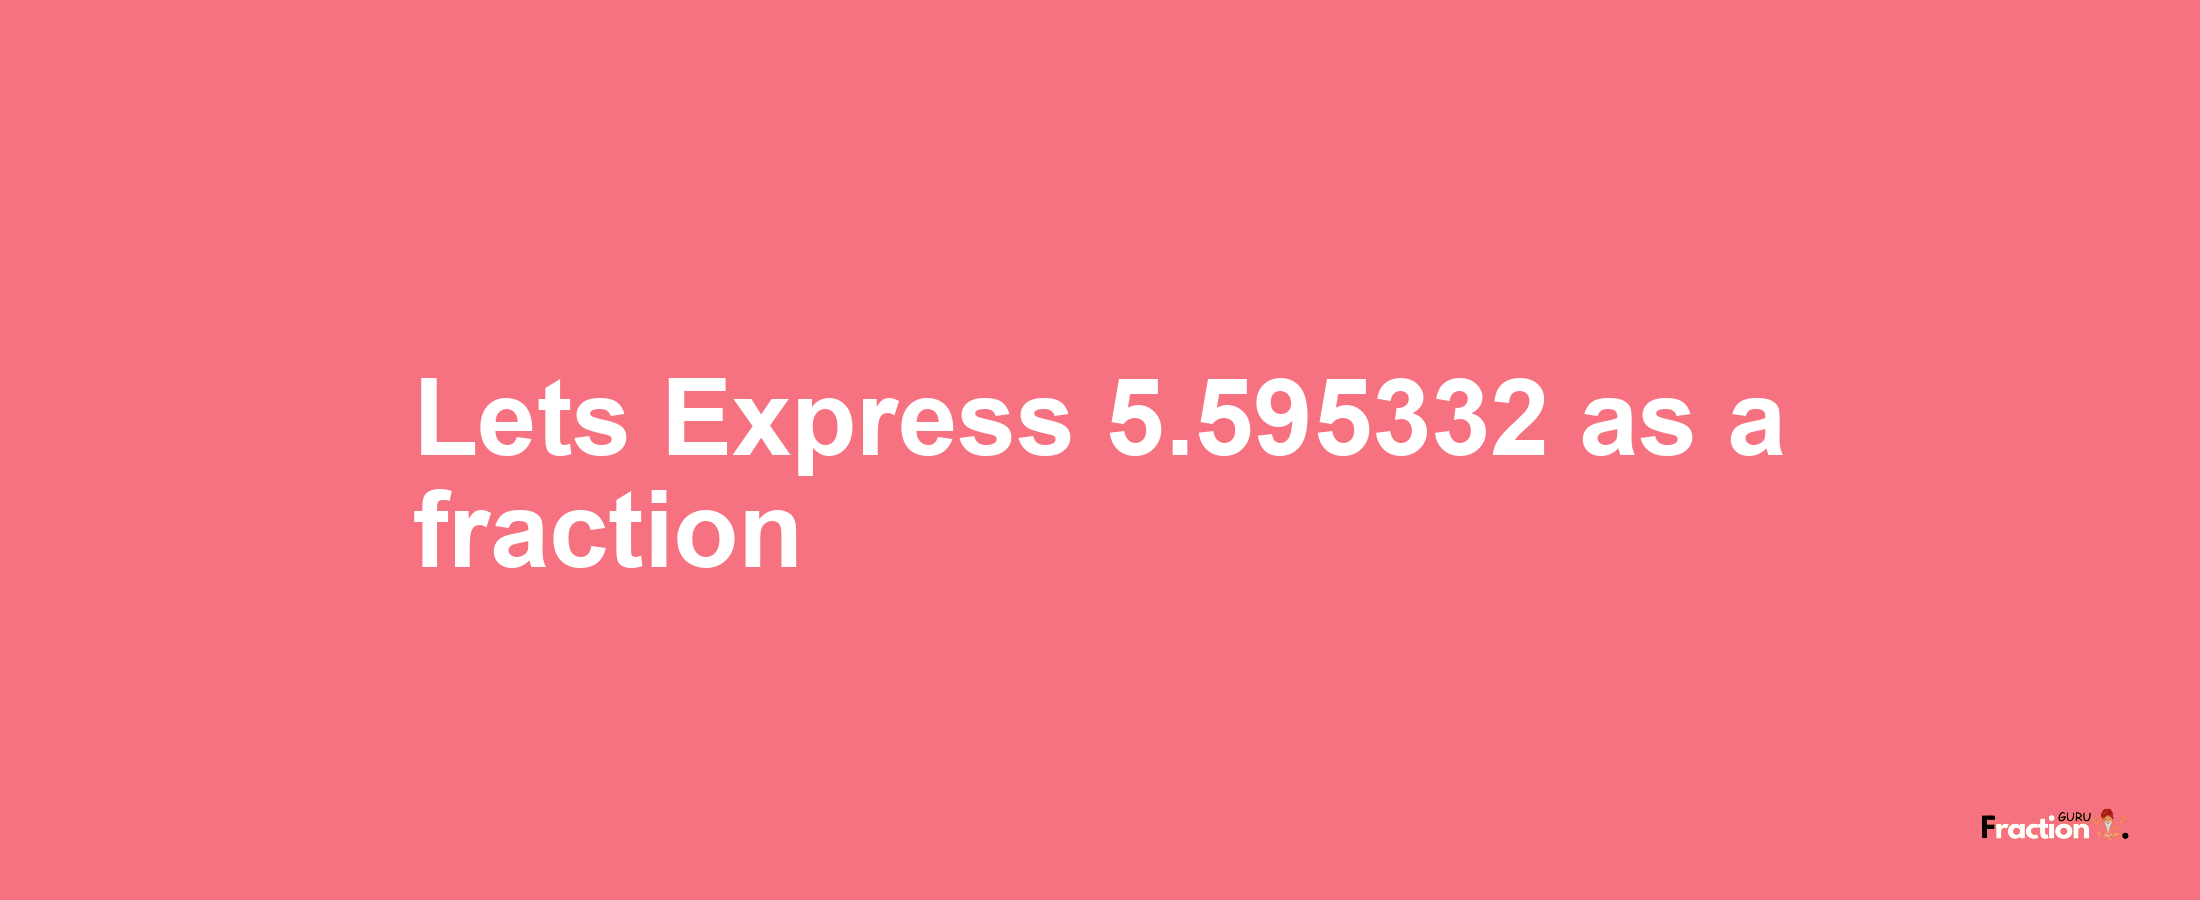 Lets Express 5.595332 as afraction